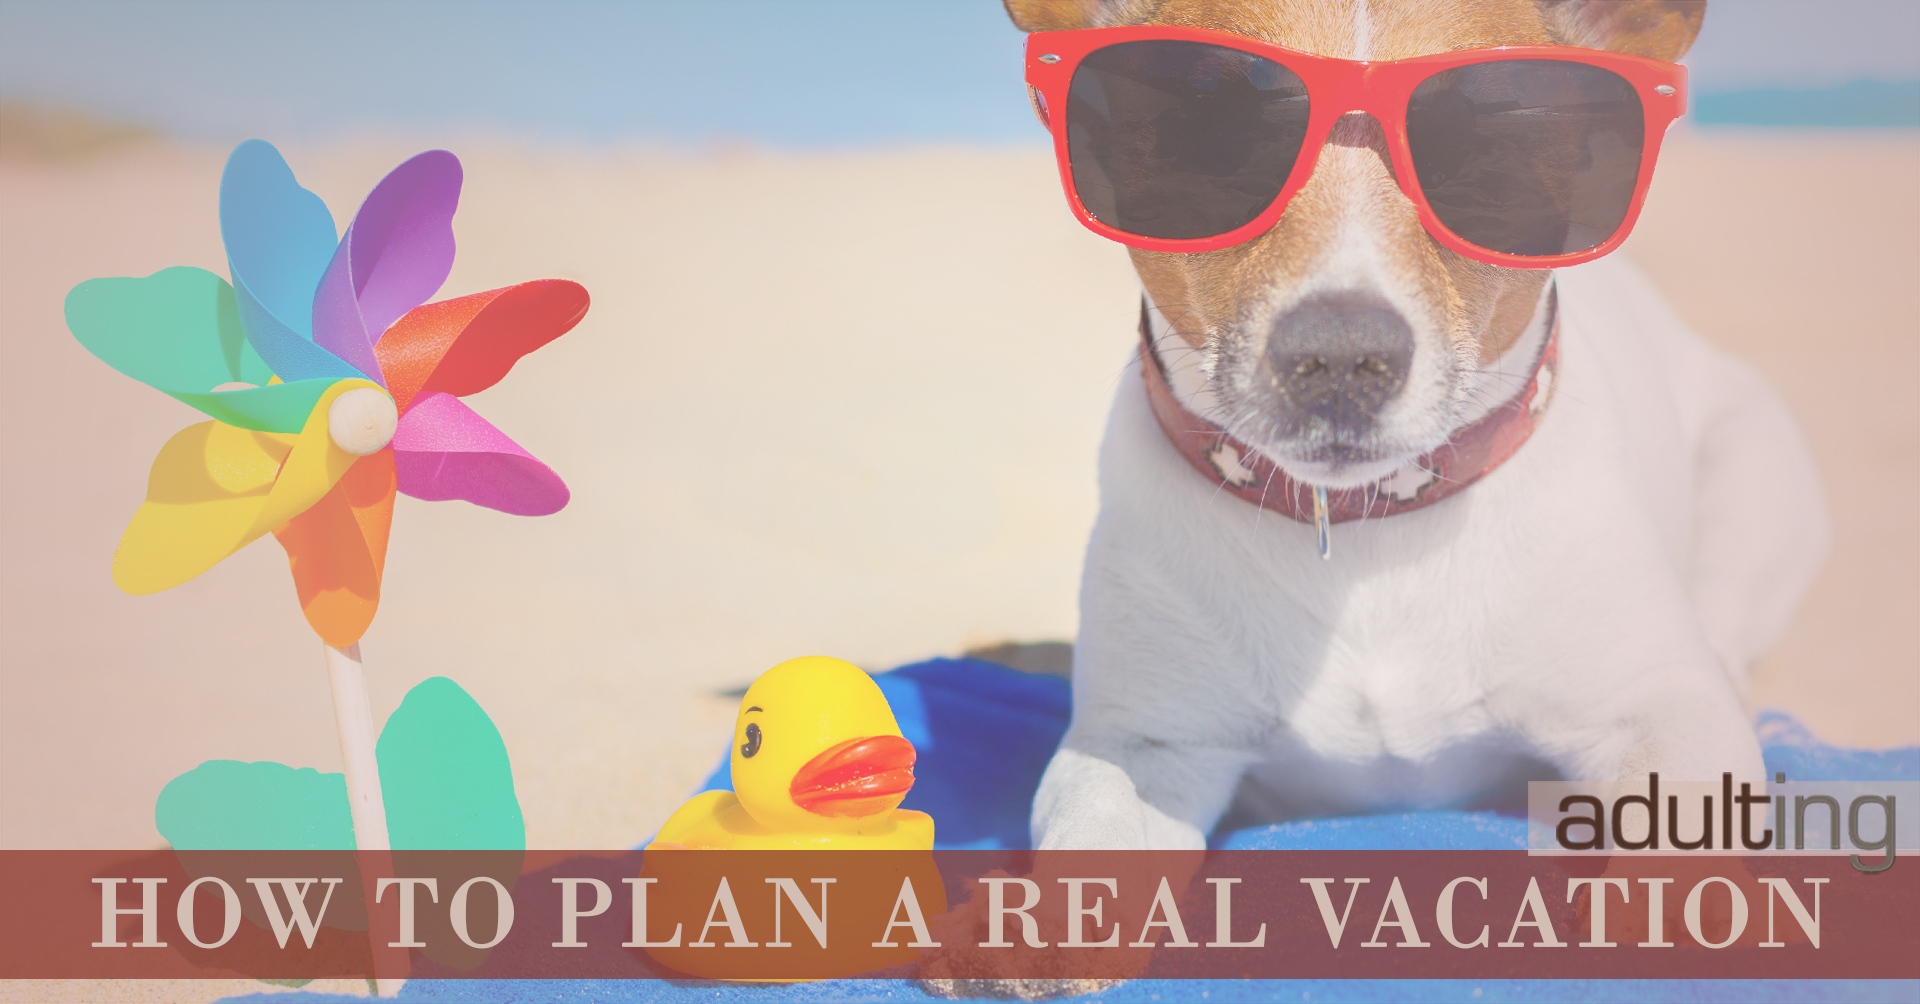 How to Plan a Real Vacation